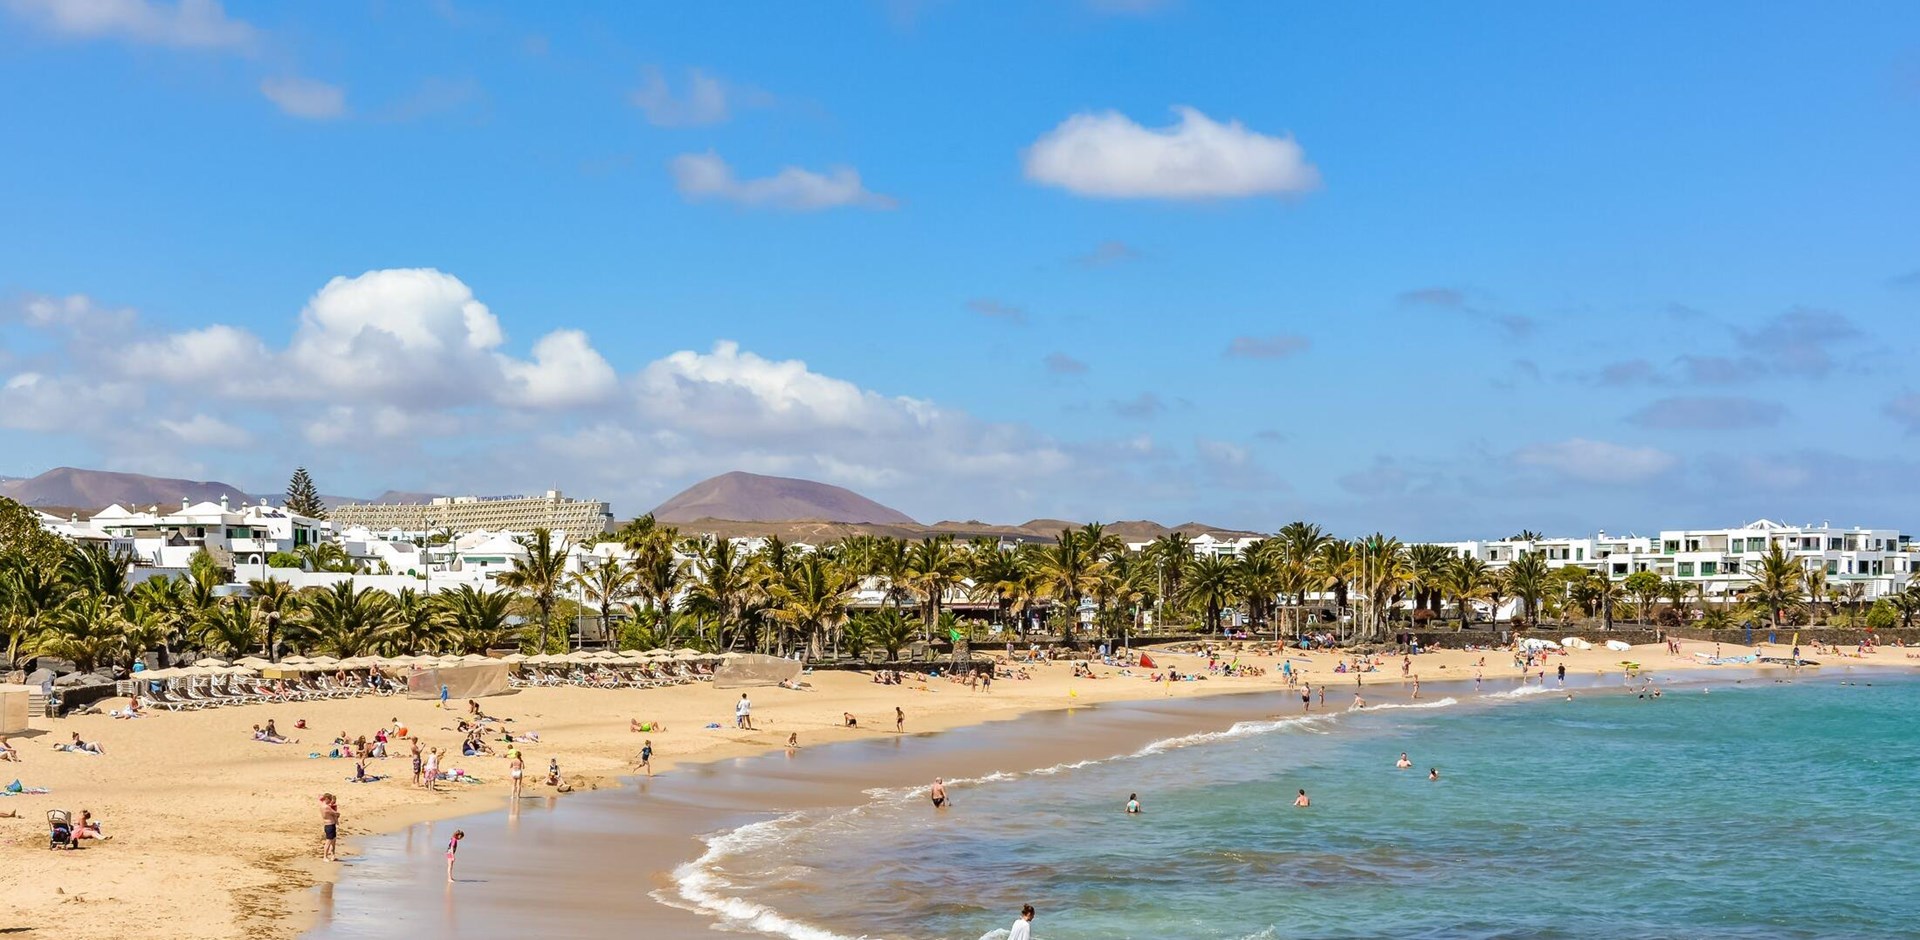 View of Costa Teguise, a touristic resort on Lanzarote island, Spain